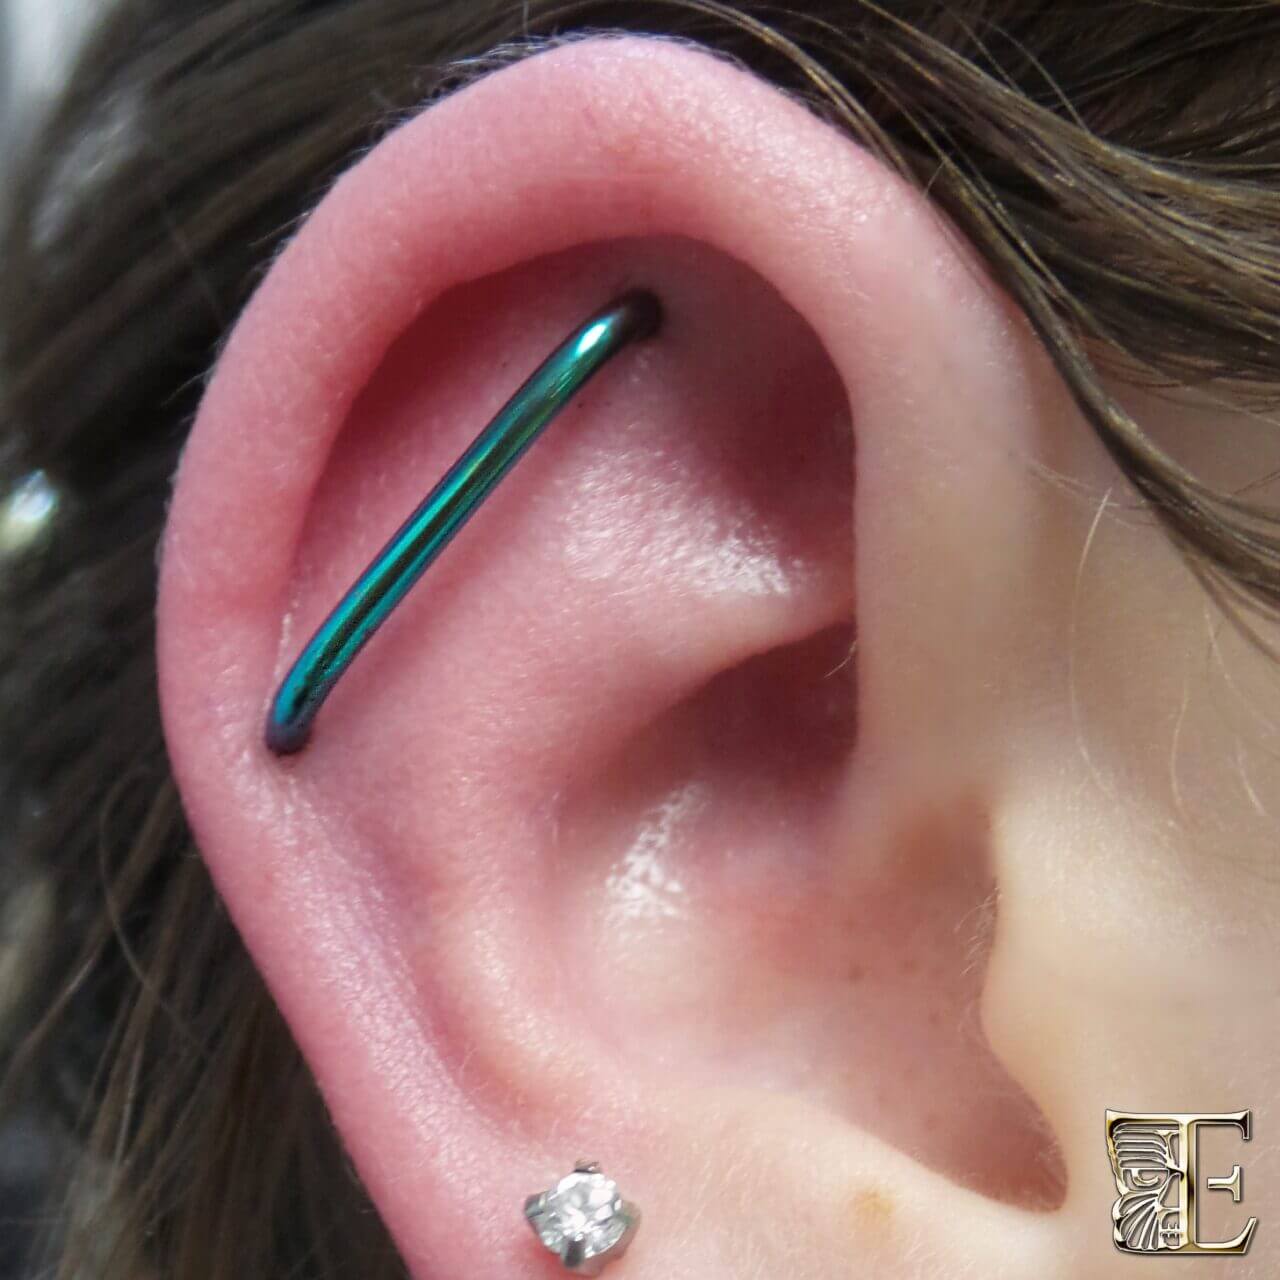 Floating lobe body piercing $50.00 & includes jewlery at Iron Palm Tattoos & body Piercing. Walk-ins accepted. Female & male master piercers on site.